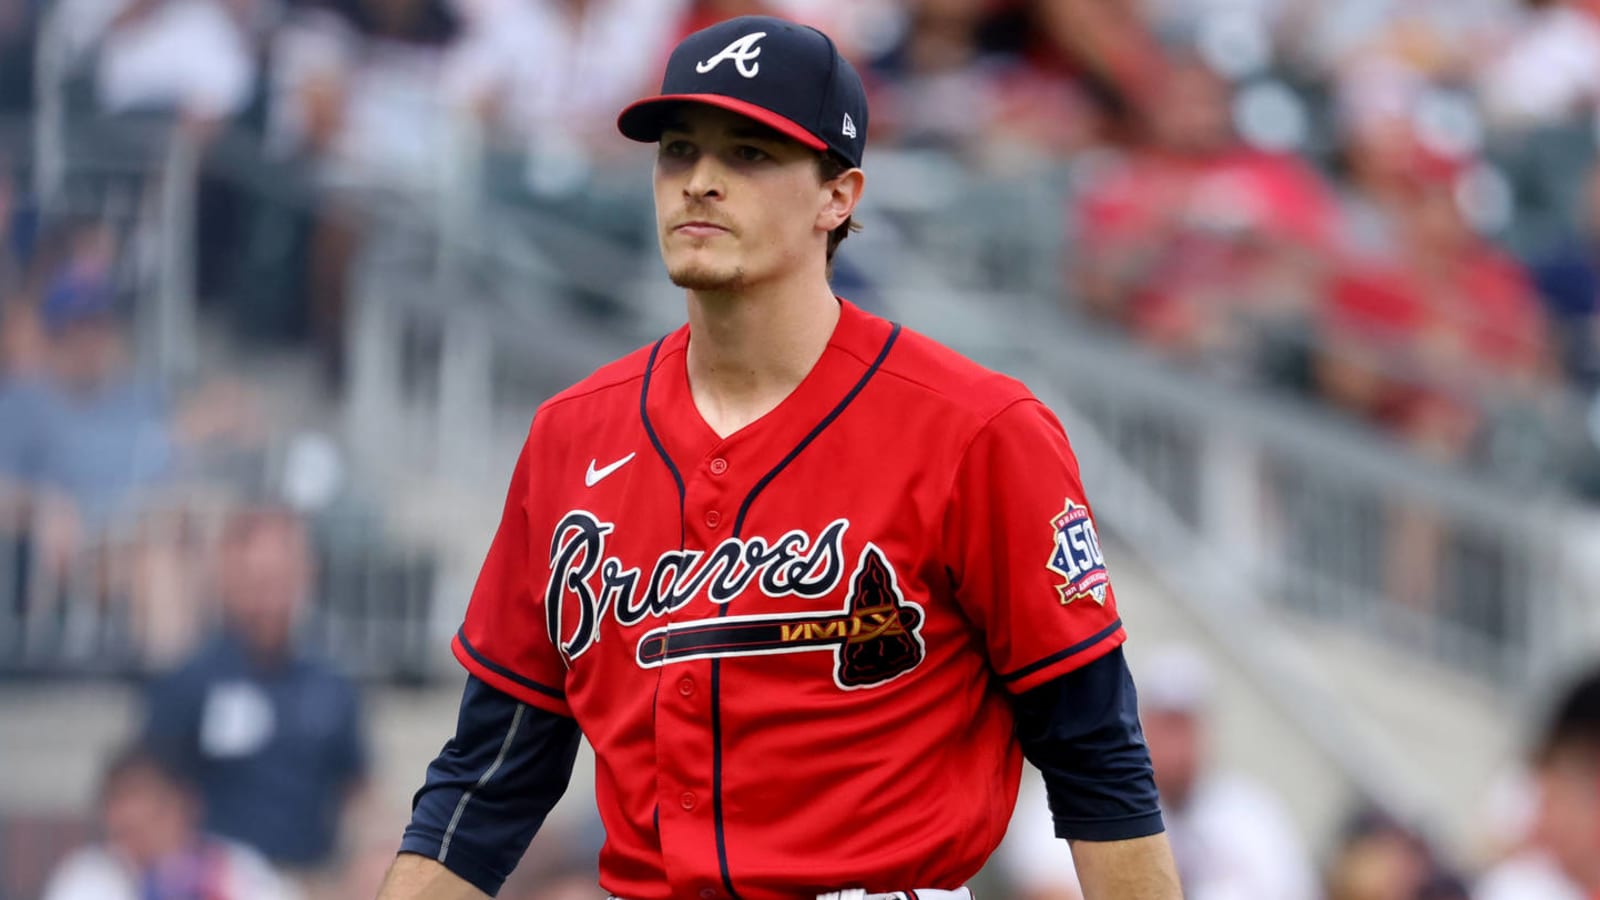 He's back: Max Fried rejoining Braves after 3-month abs